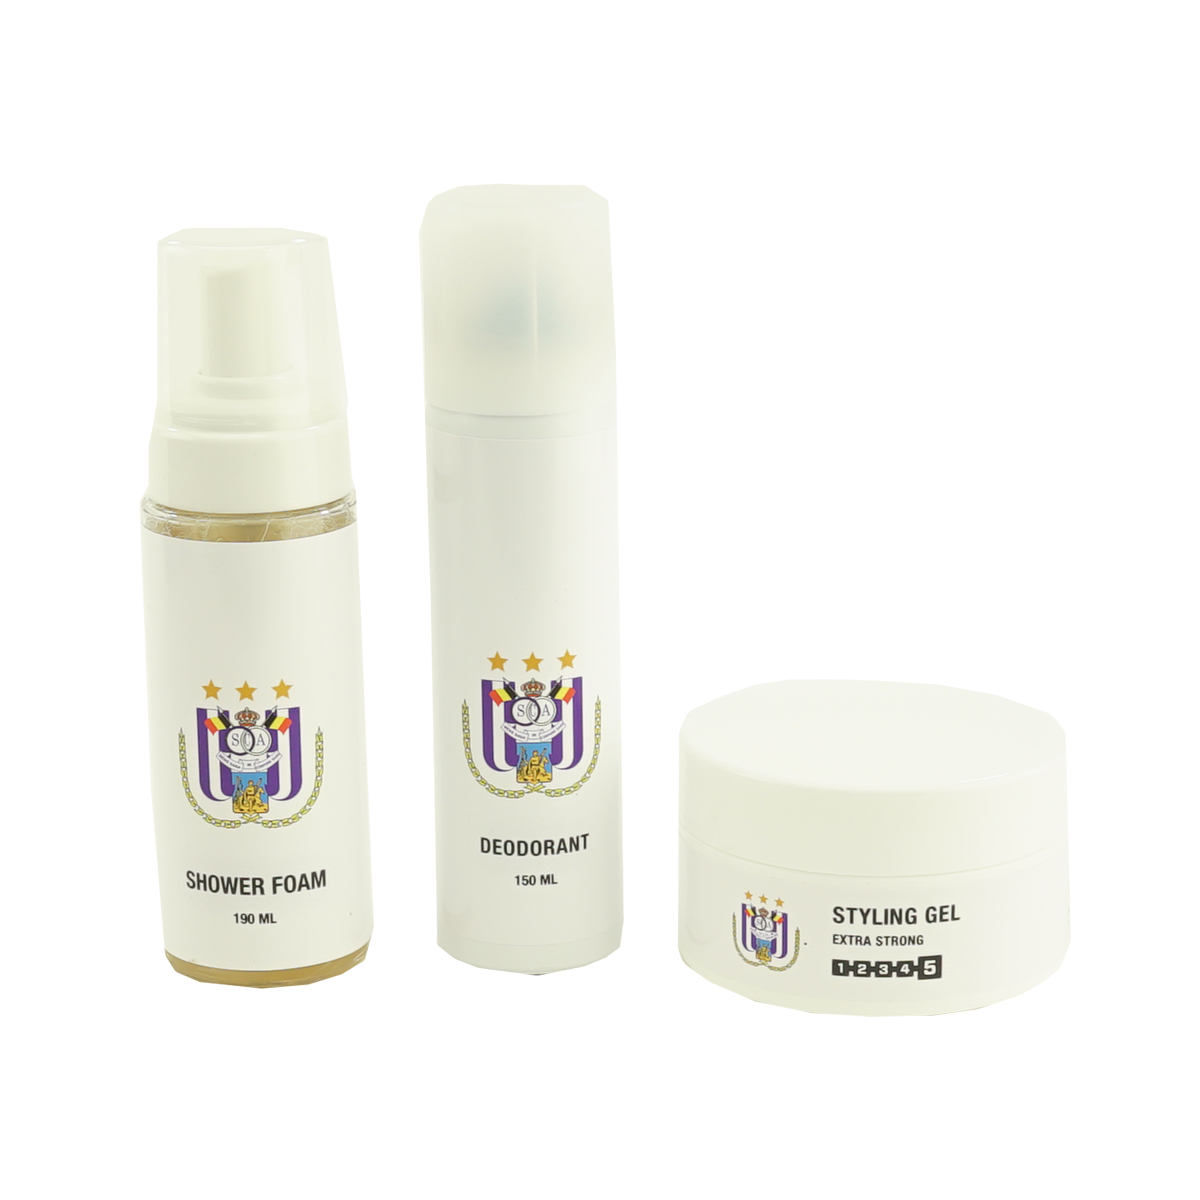 RSCA Beauty Set is-hover